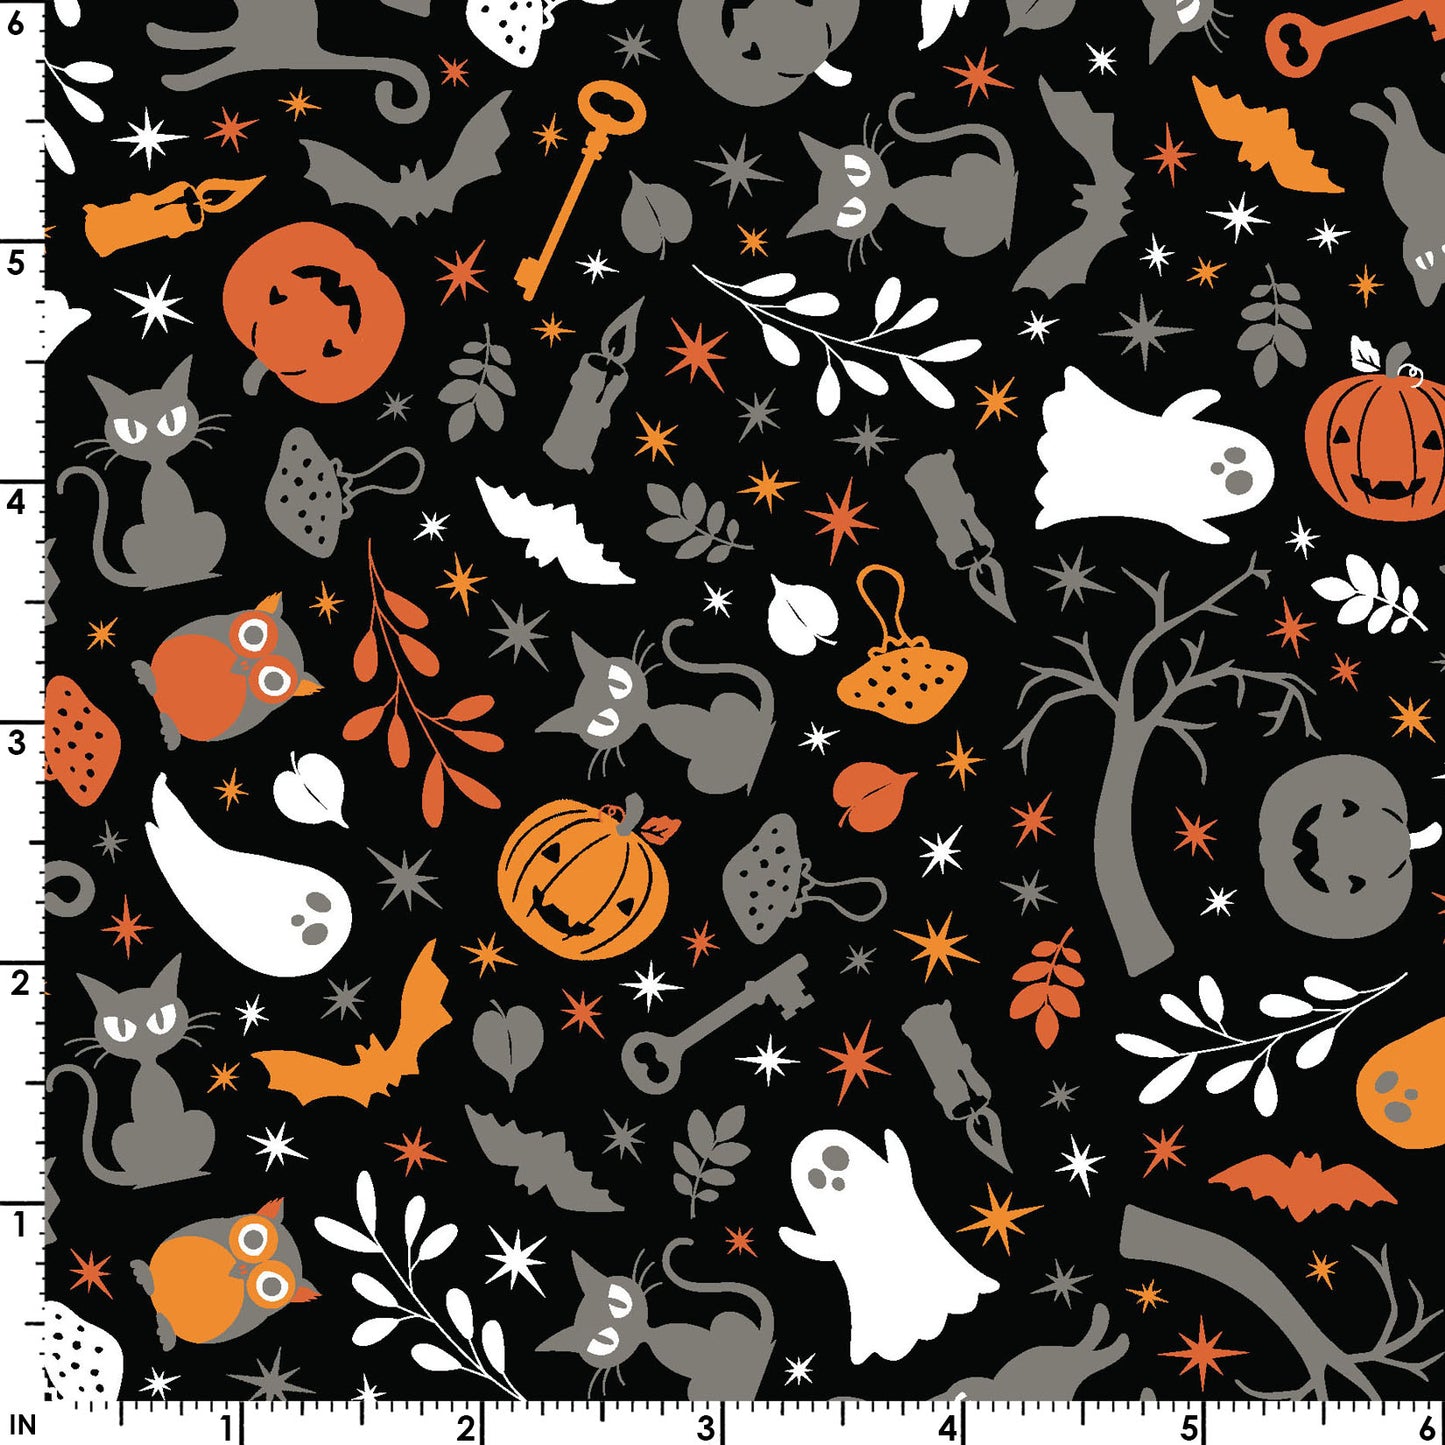 The Cats and Ghosts print on a black background (MAS10571-J) from the Pumpkin and Potions line by Kimberbell for Maywood Studio features black cats, ghosts, pumpkins, owls, bats, spooky trees, and more. Photo shows details of the designs with a ruler to show the scale.